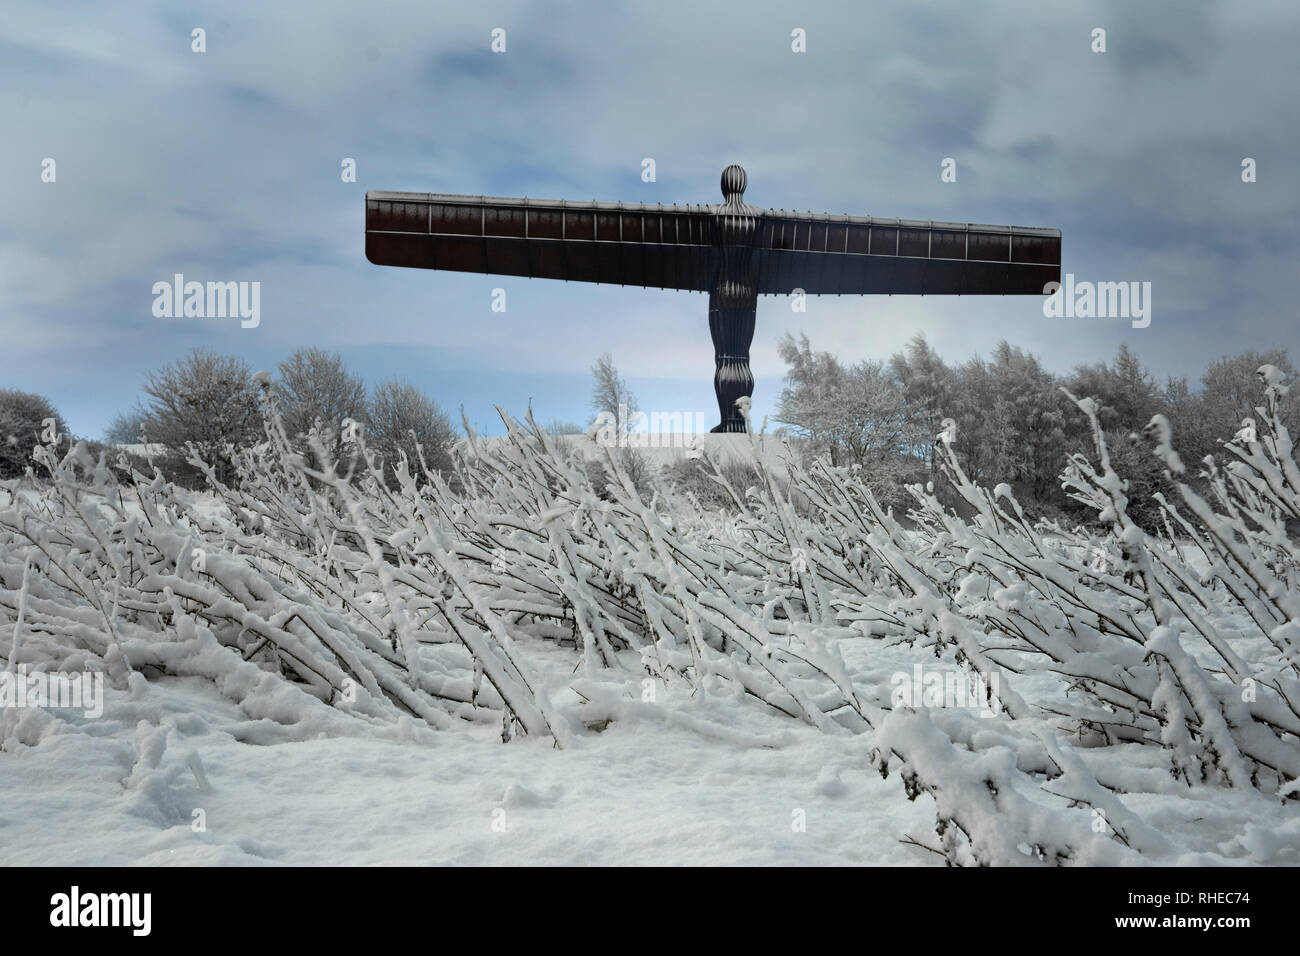 A time exposure of the Angel of the North in Gateshead, taken at 02:50hrs Saturday, after snowfall on Friday and overnight are expected to bring widespread disruption. Stock Photo